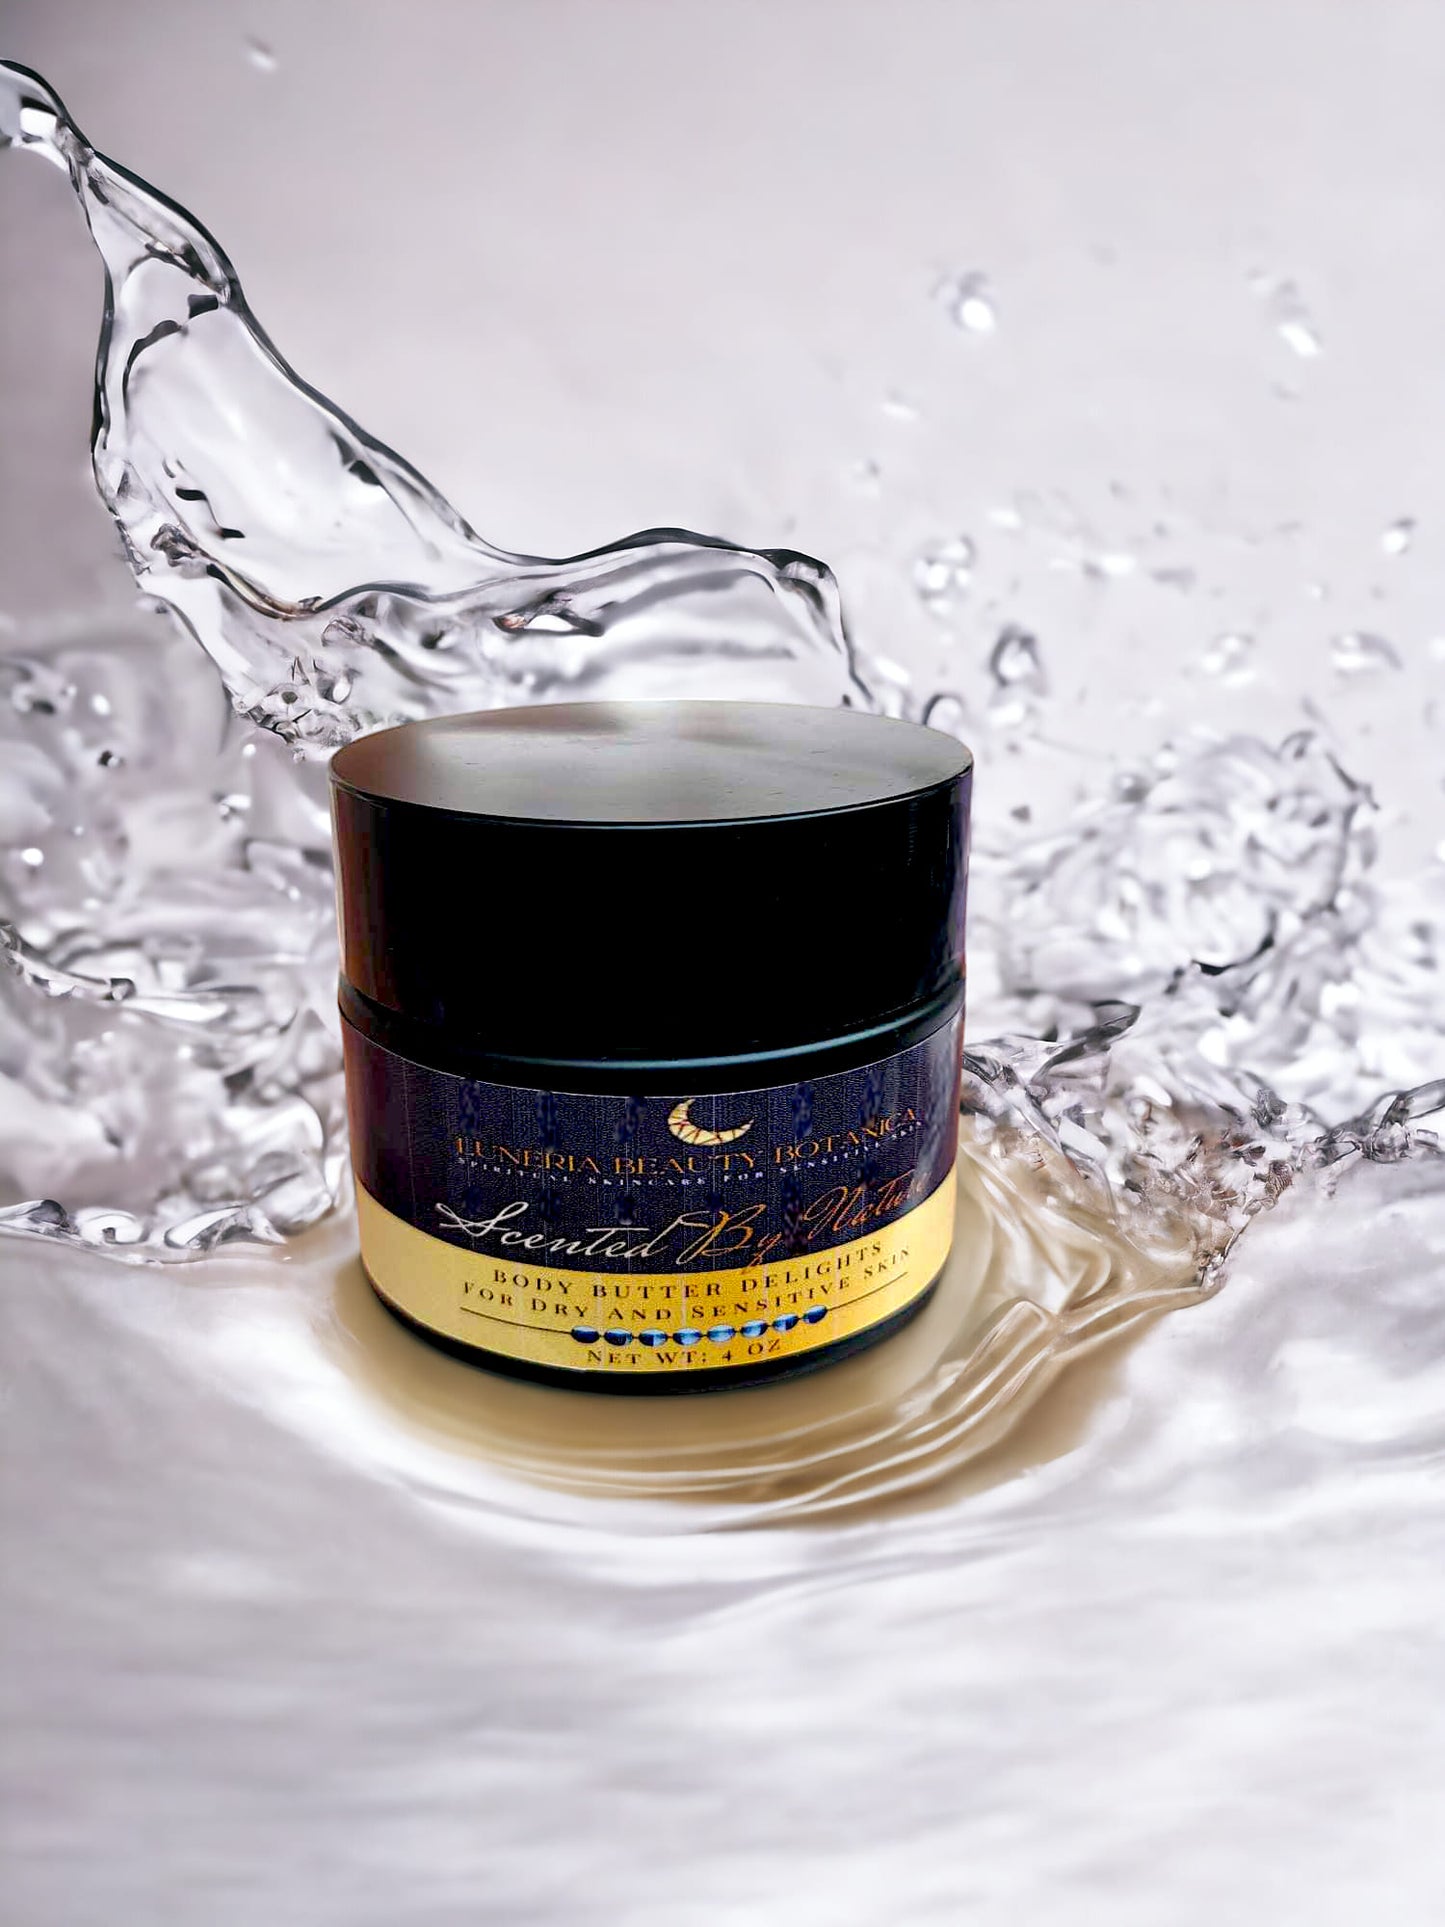 Scented by Nature's Fragrance-Free Body Butter - Pure Hydration for Sensitive Skin